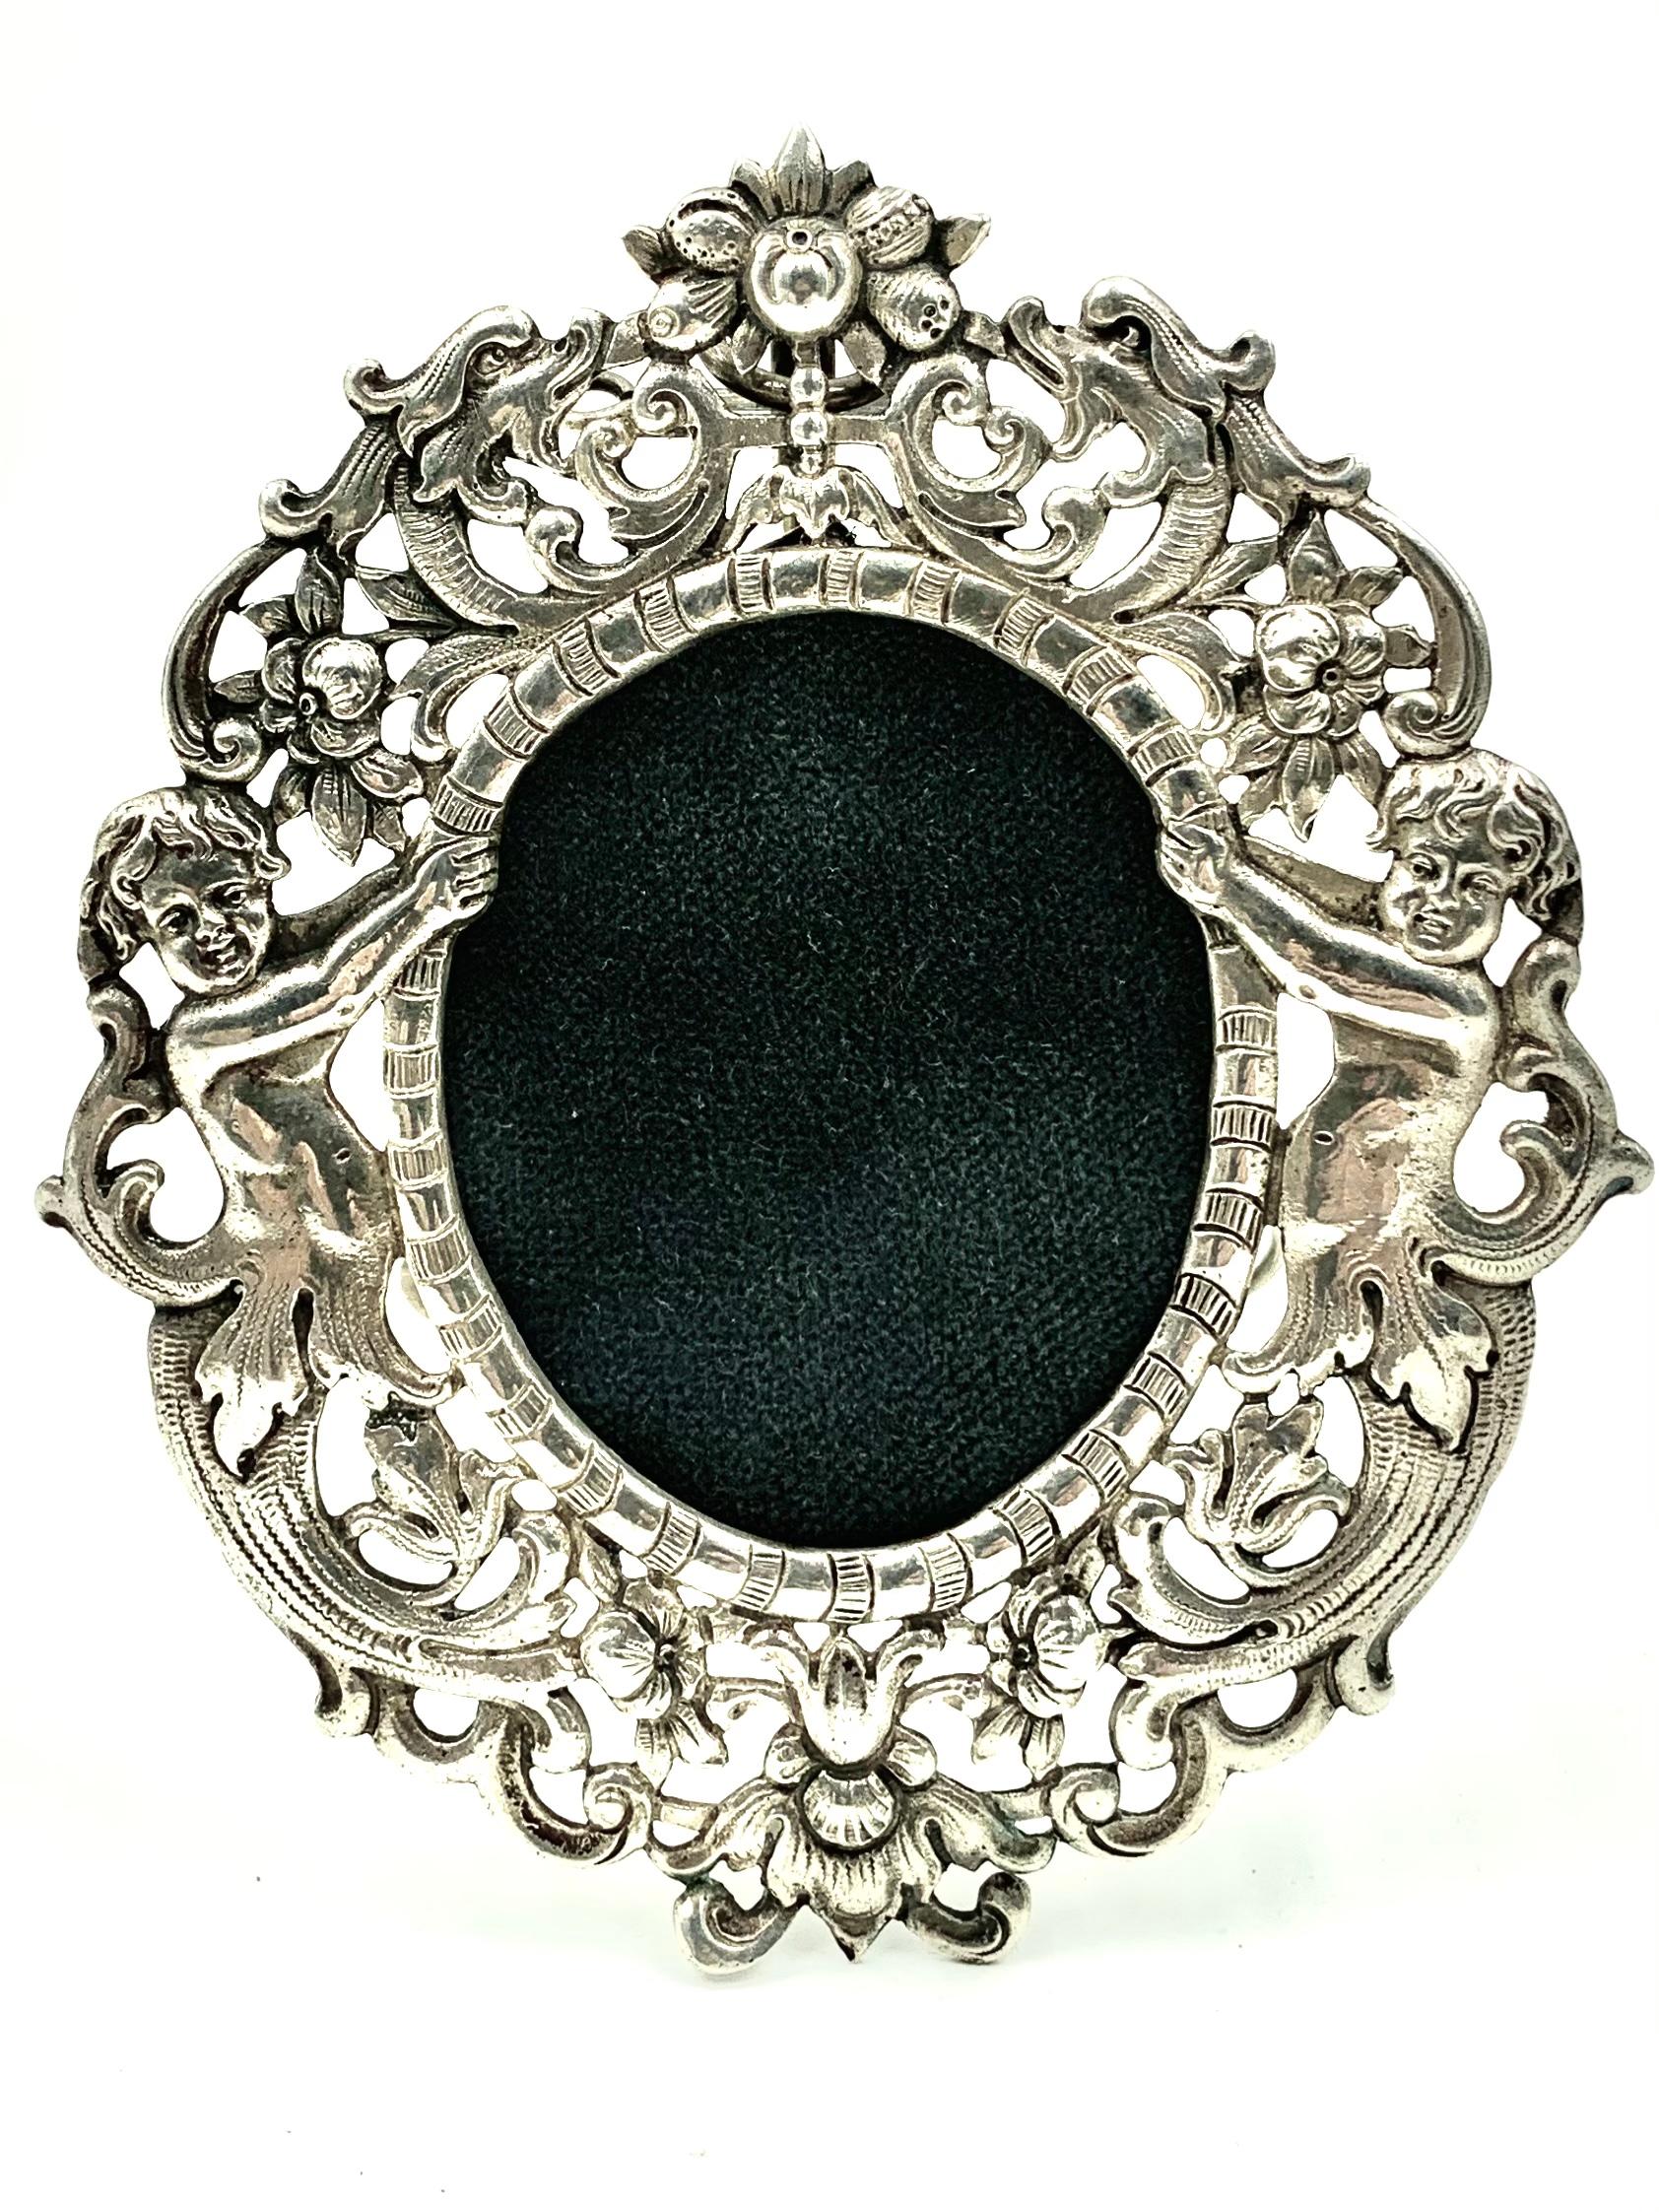 Romantic Ornate Oval Silver Picture Frame, Angels with Floral Garlands In Good Condition For Sale In New York, NY